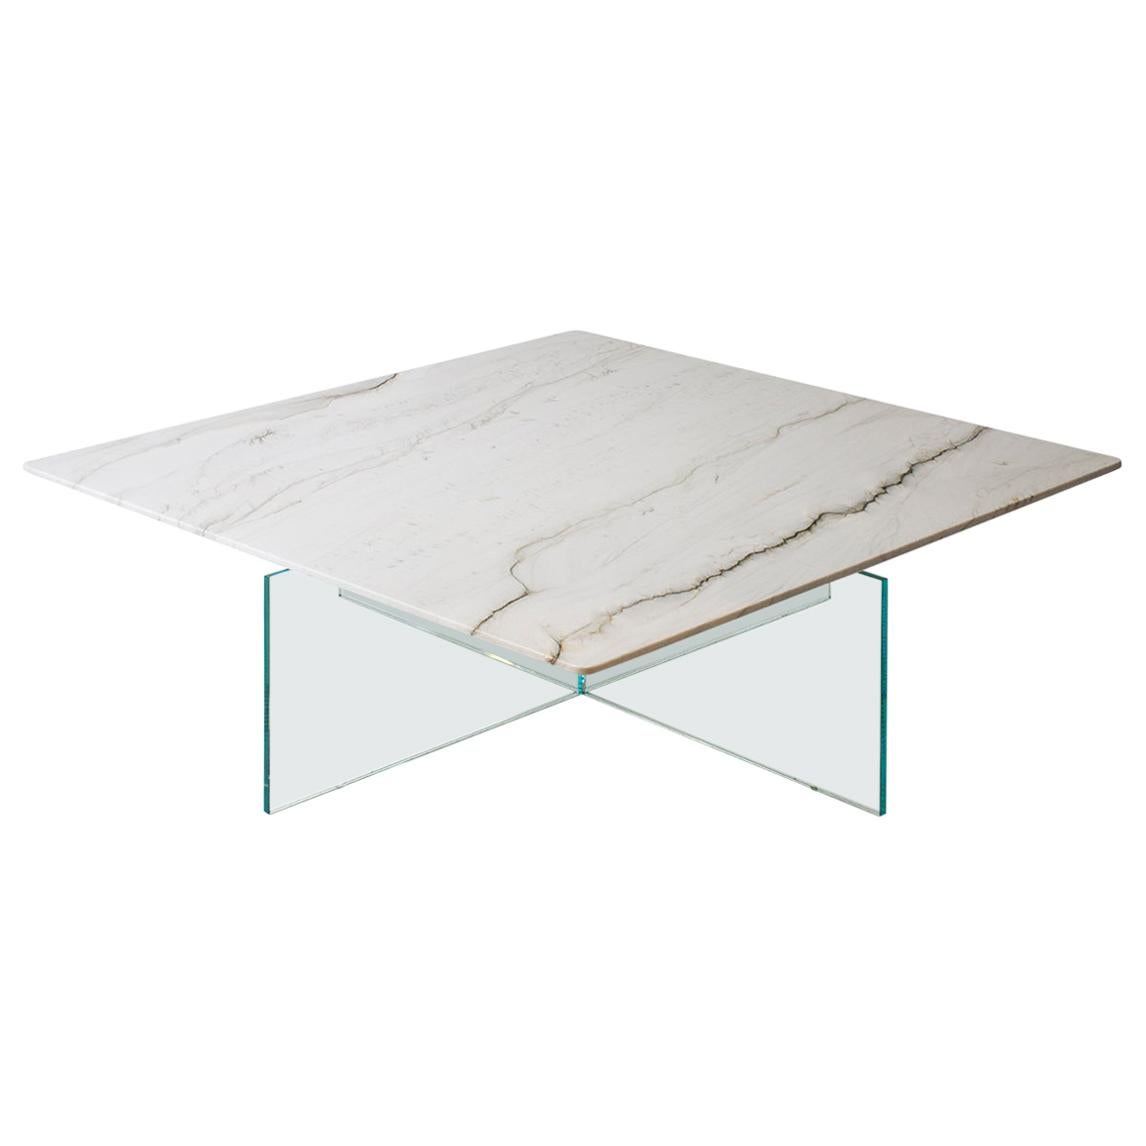 Claste Beside Myself Mini Coffee Table in Cararra Classico Marble and Glass Base